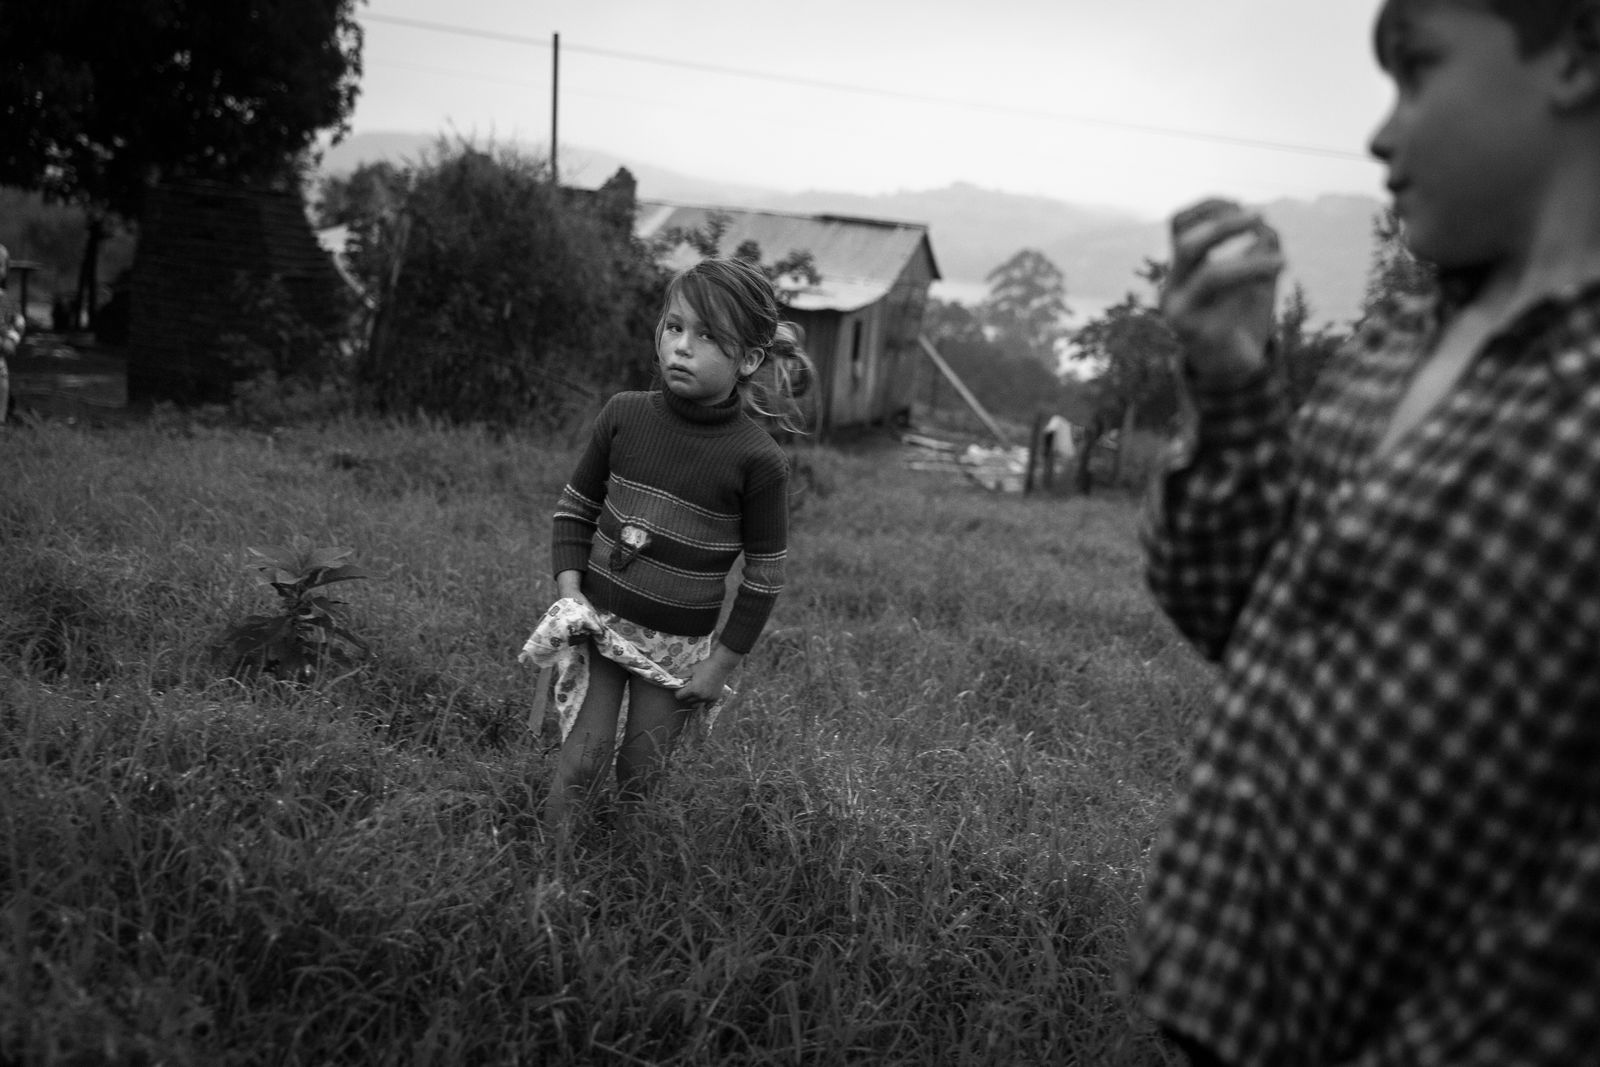 © Mercedes Cotoli - Image from the Barrerito, childhood on the border photography project